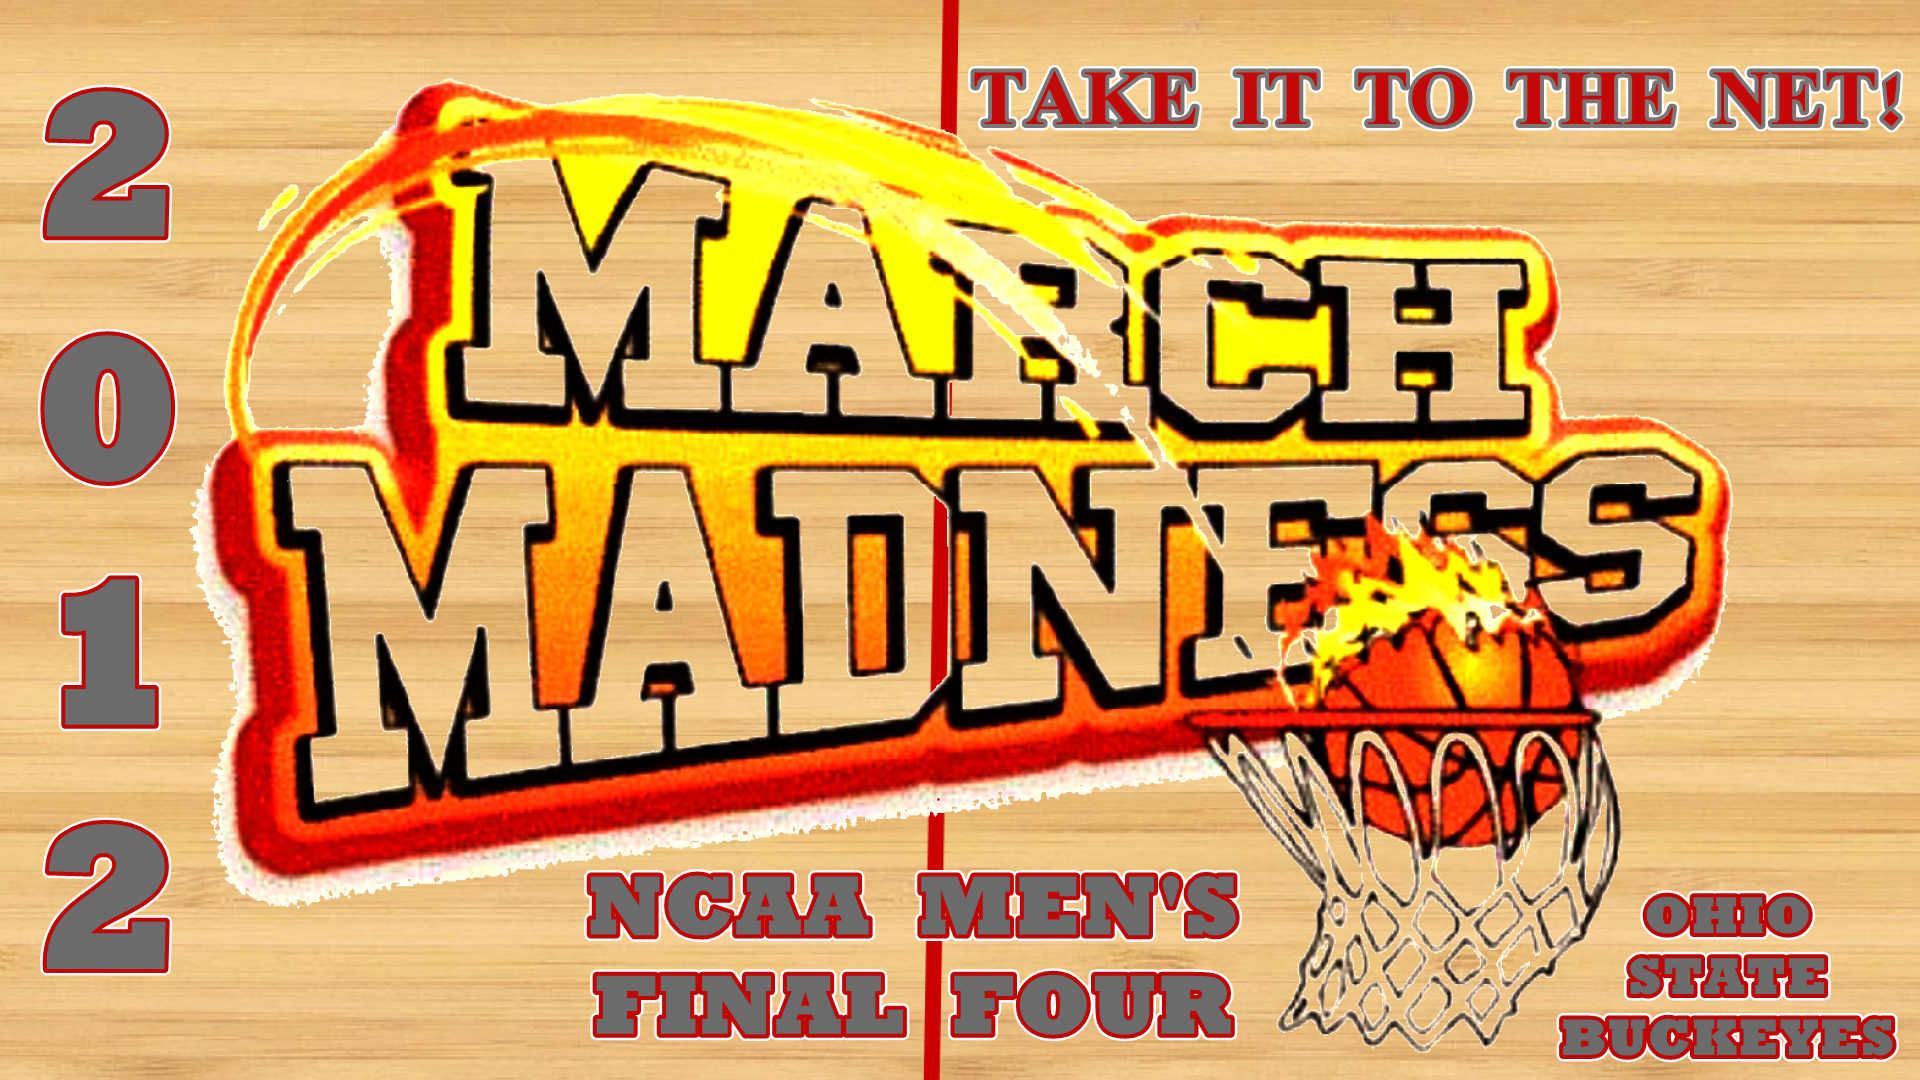 March Madness Ncaa Men S Final Four   Ohio State University Basketball